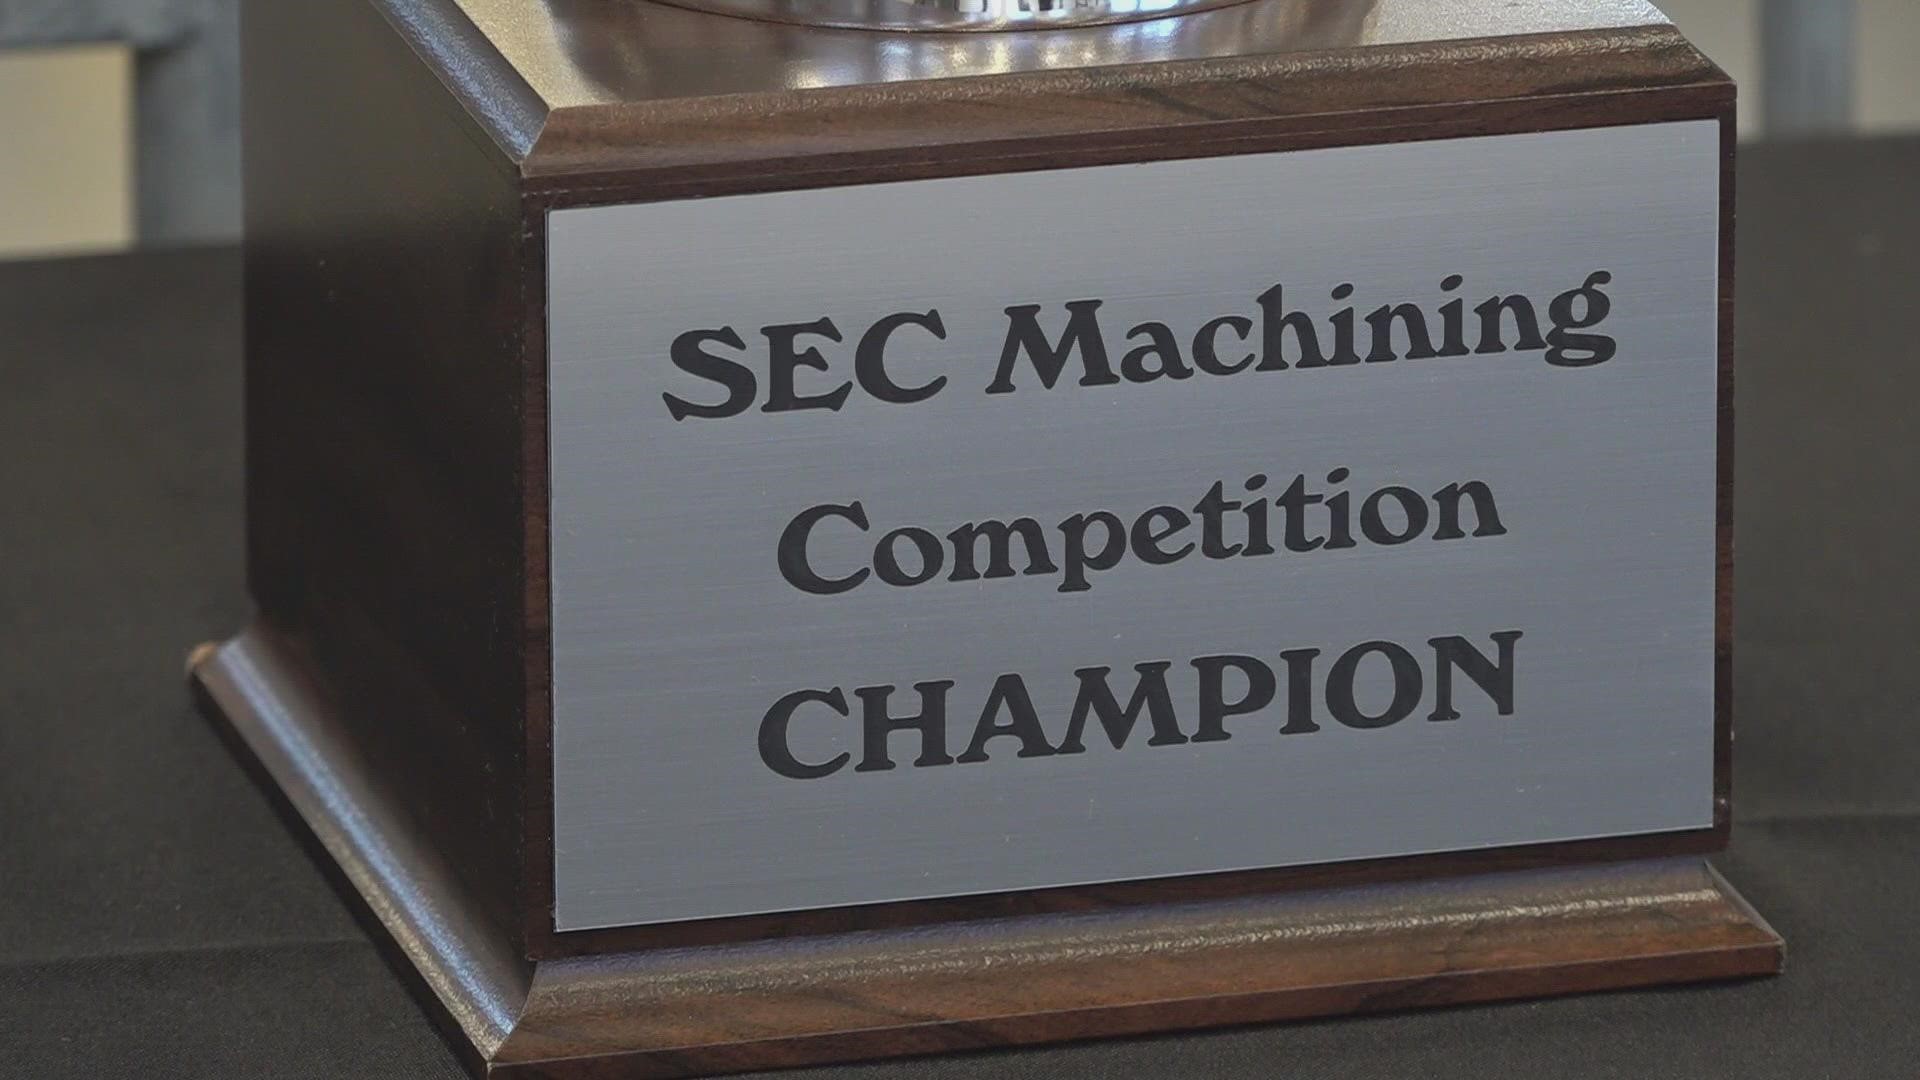 Teams from four SEC schools took part in a new CNC machining competition to create parts of the SEC logo out of metal and other materials.